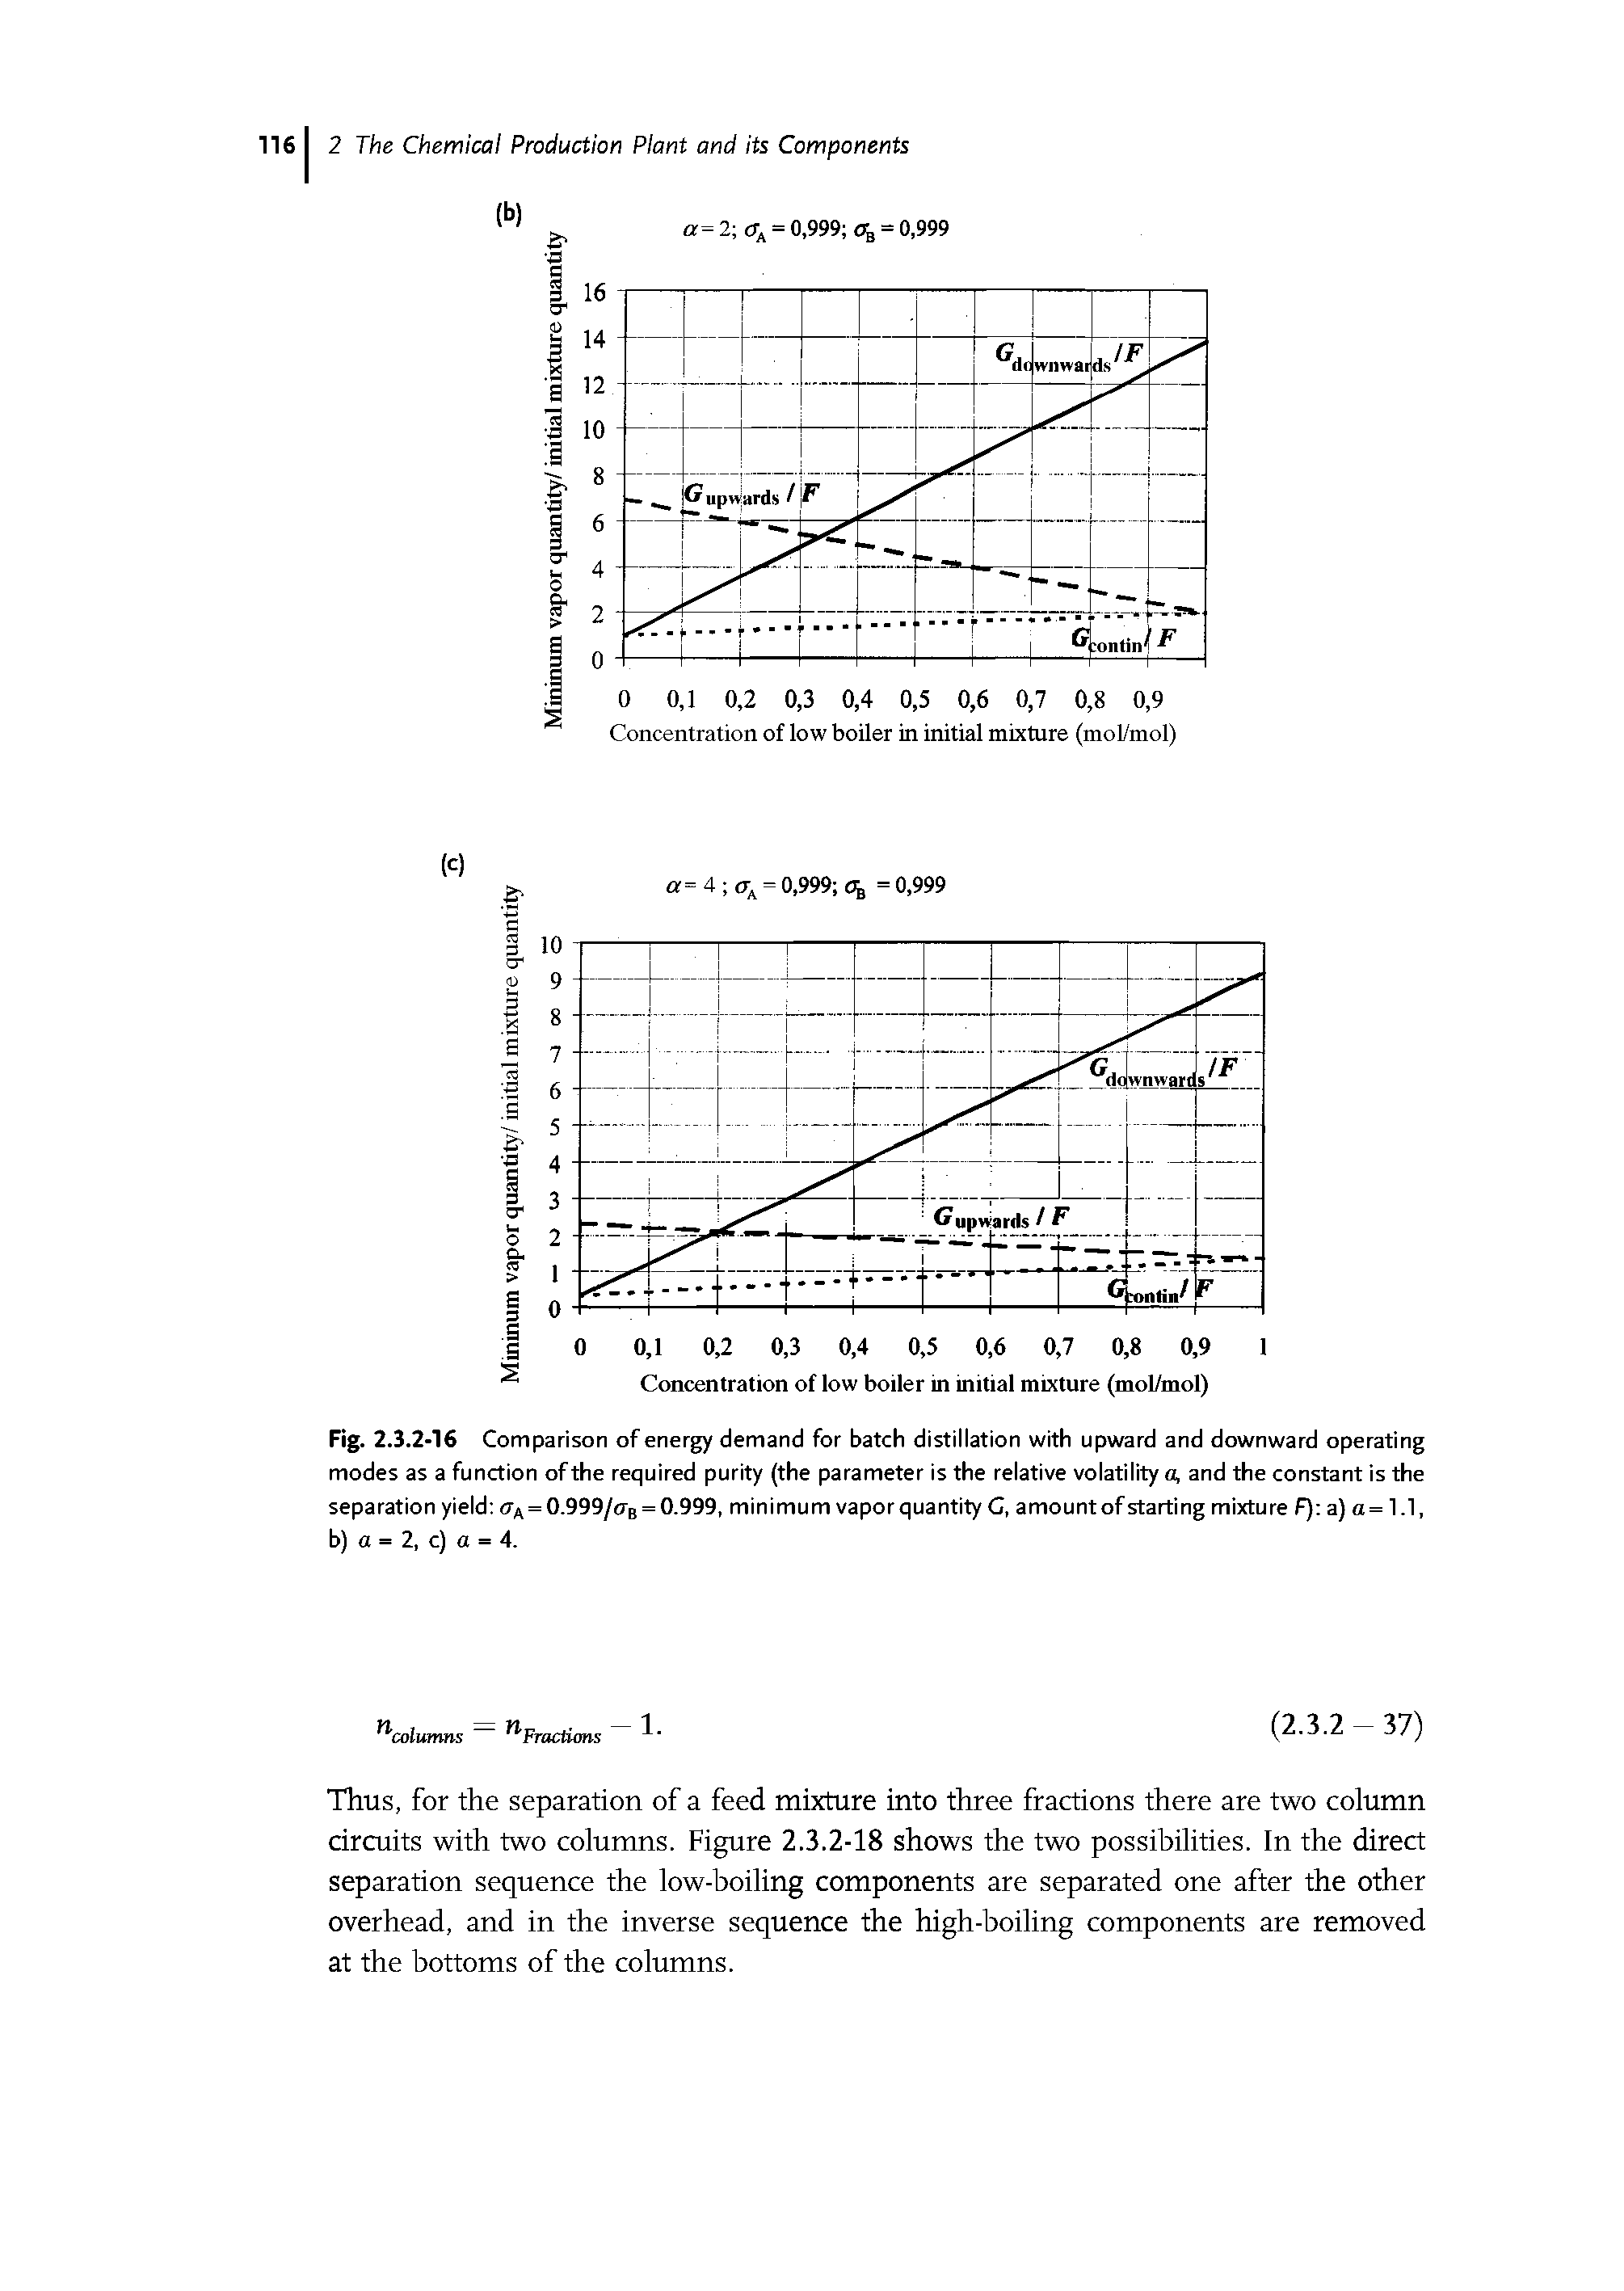 Fig. 2.3.2-16 Comparison of energy demand for batch distillation with upward and downward operating modes as a function of the required purity (the parameter is the relative volatility a, and the constant is the separation yield = 0.999/<Tb = 0.999, minimum vapor quantity G, amount of starting mixture F) a) a= 1.1, b) a = 2, c) a = 4.